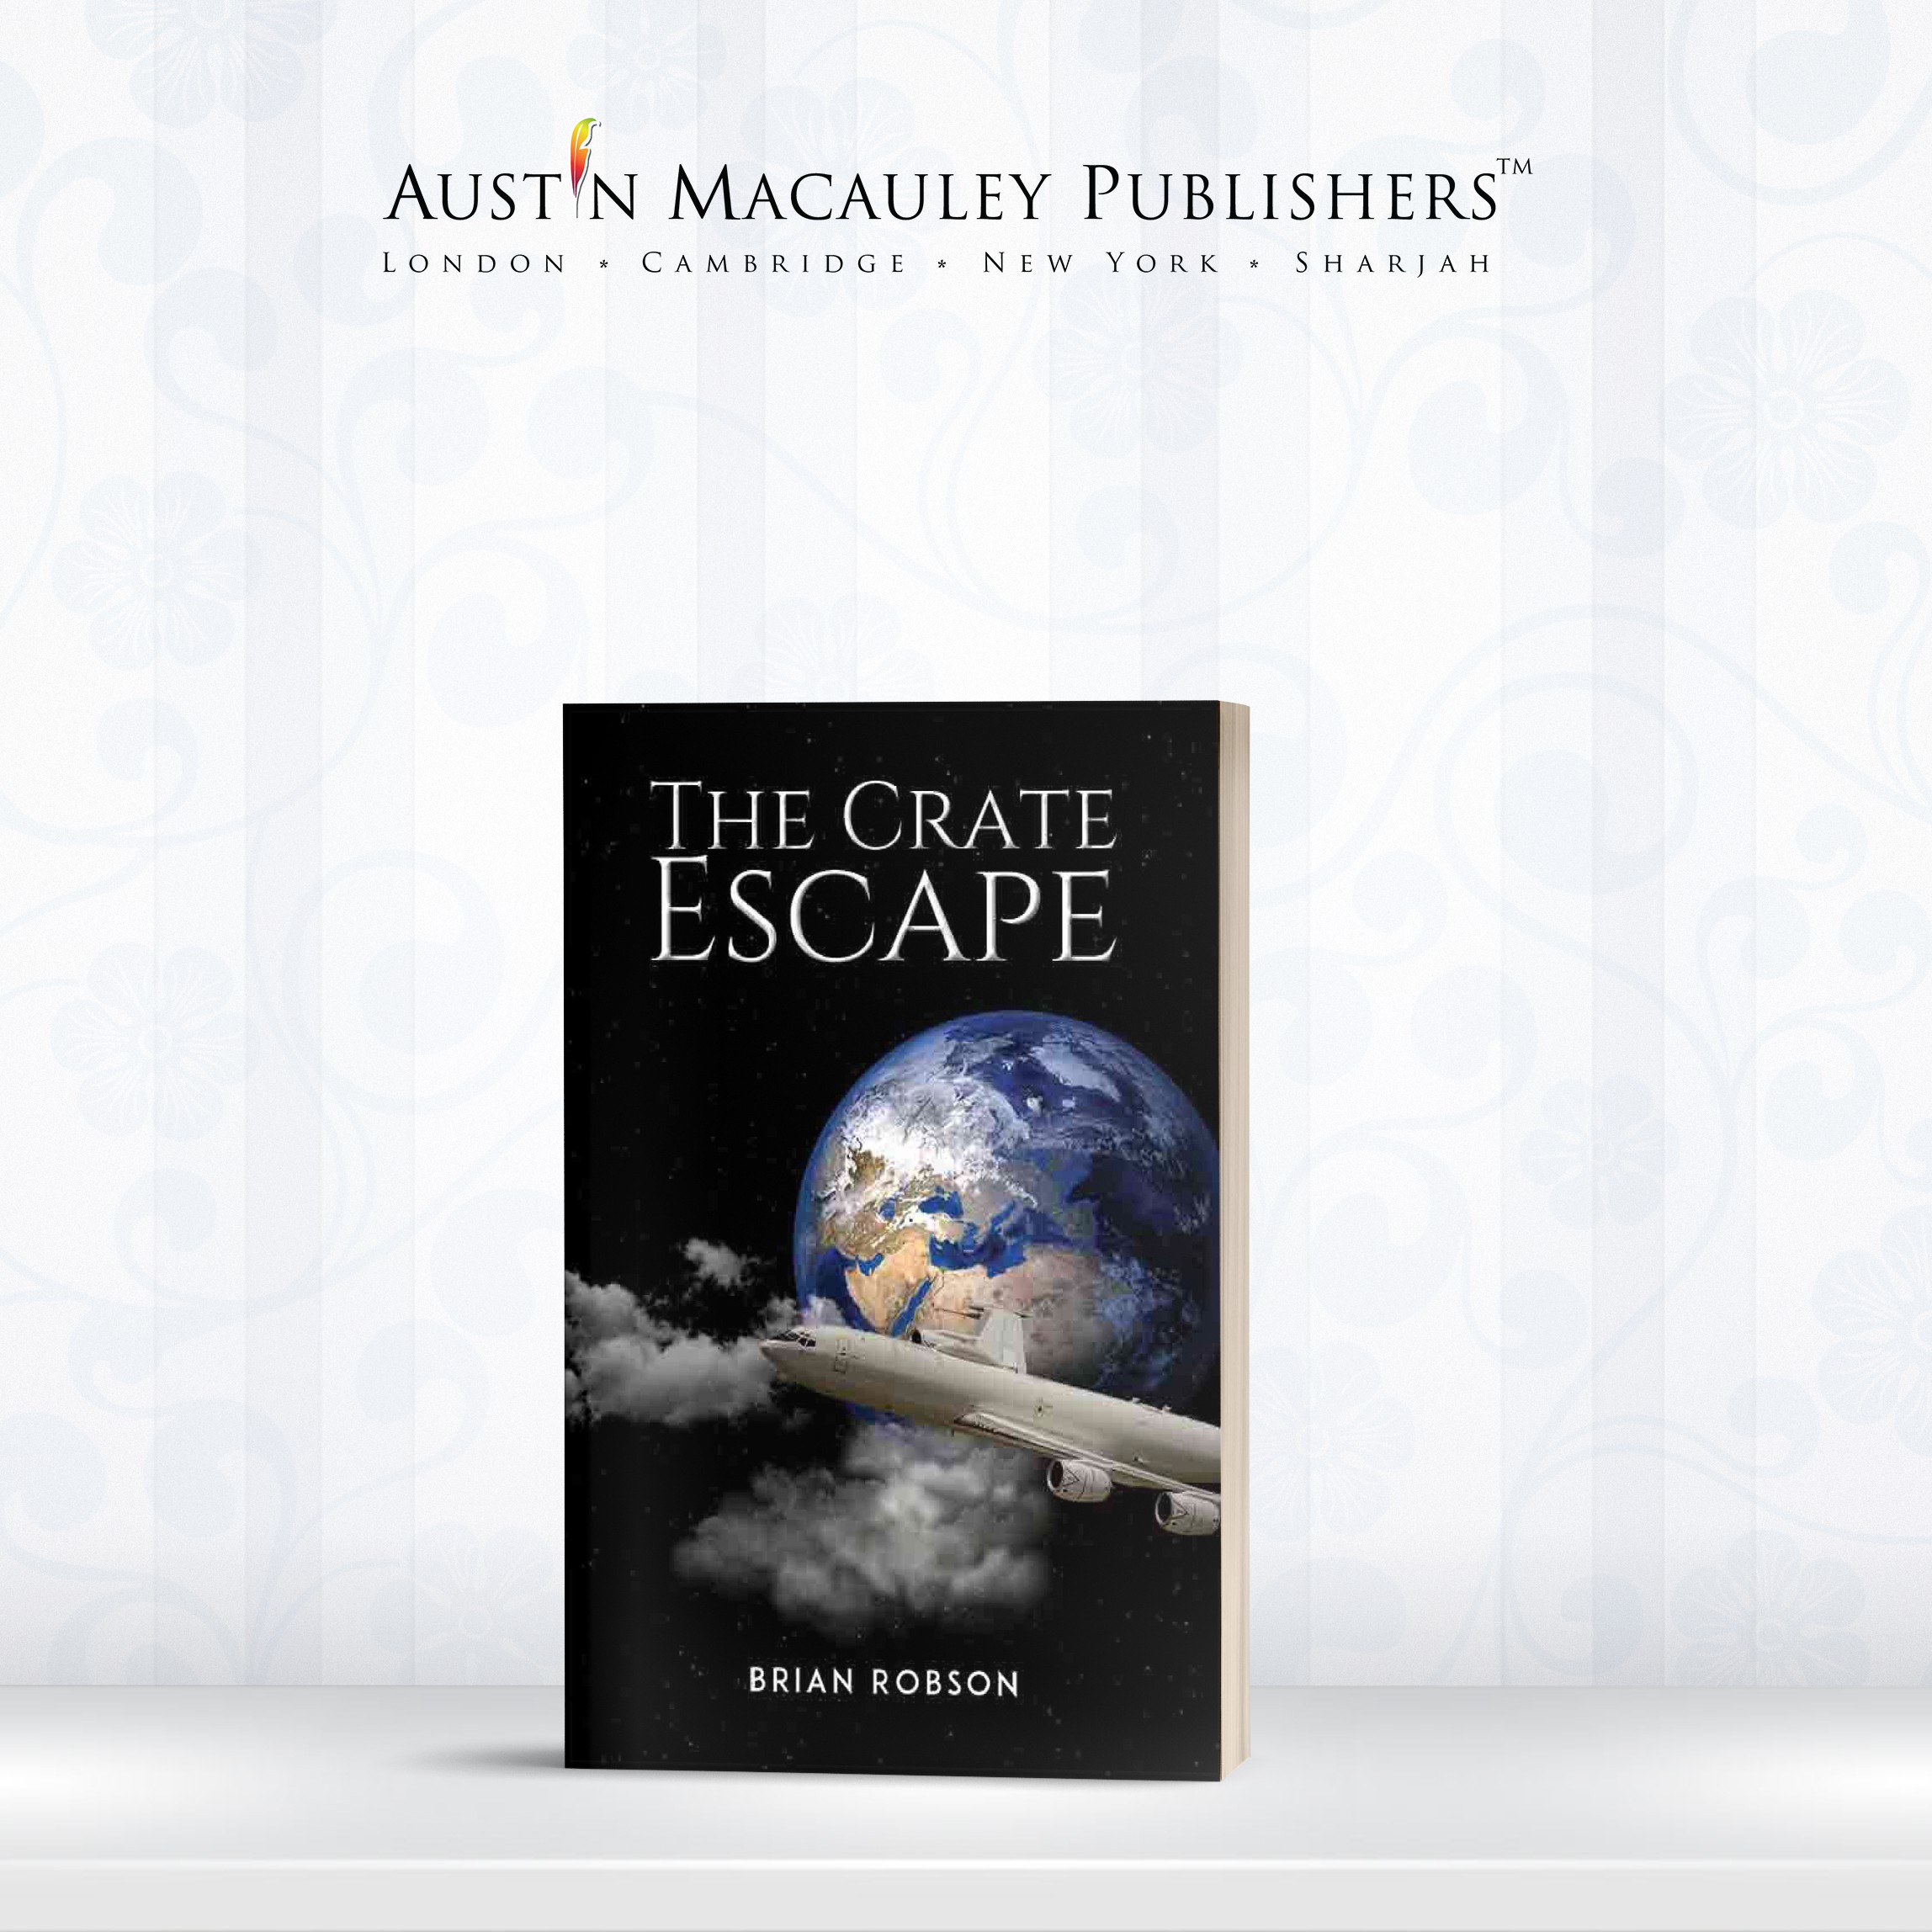 A Blog Post Appeared on Austin Macauley’s Famous Author – Brian Robson 